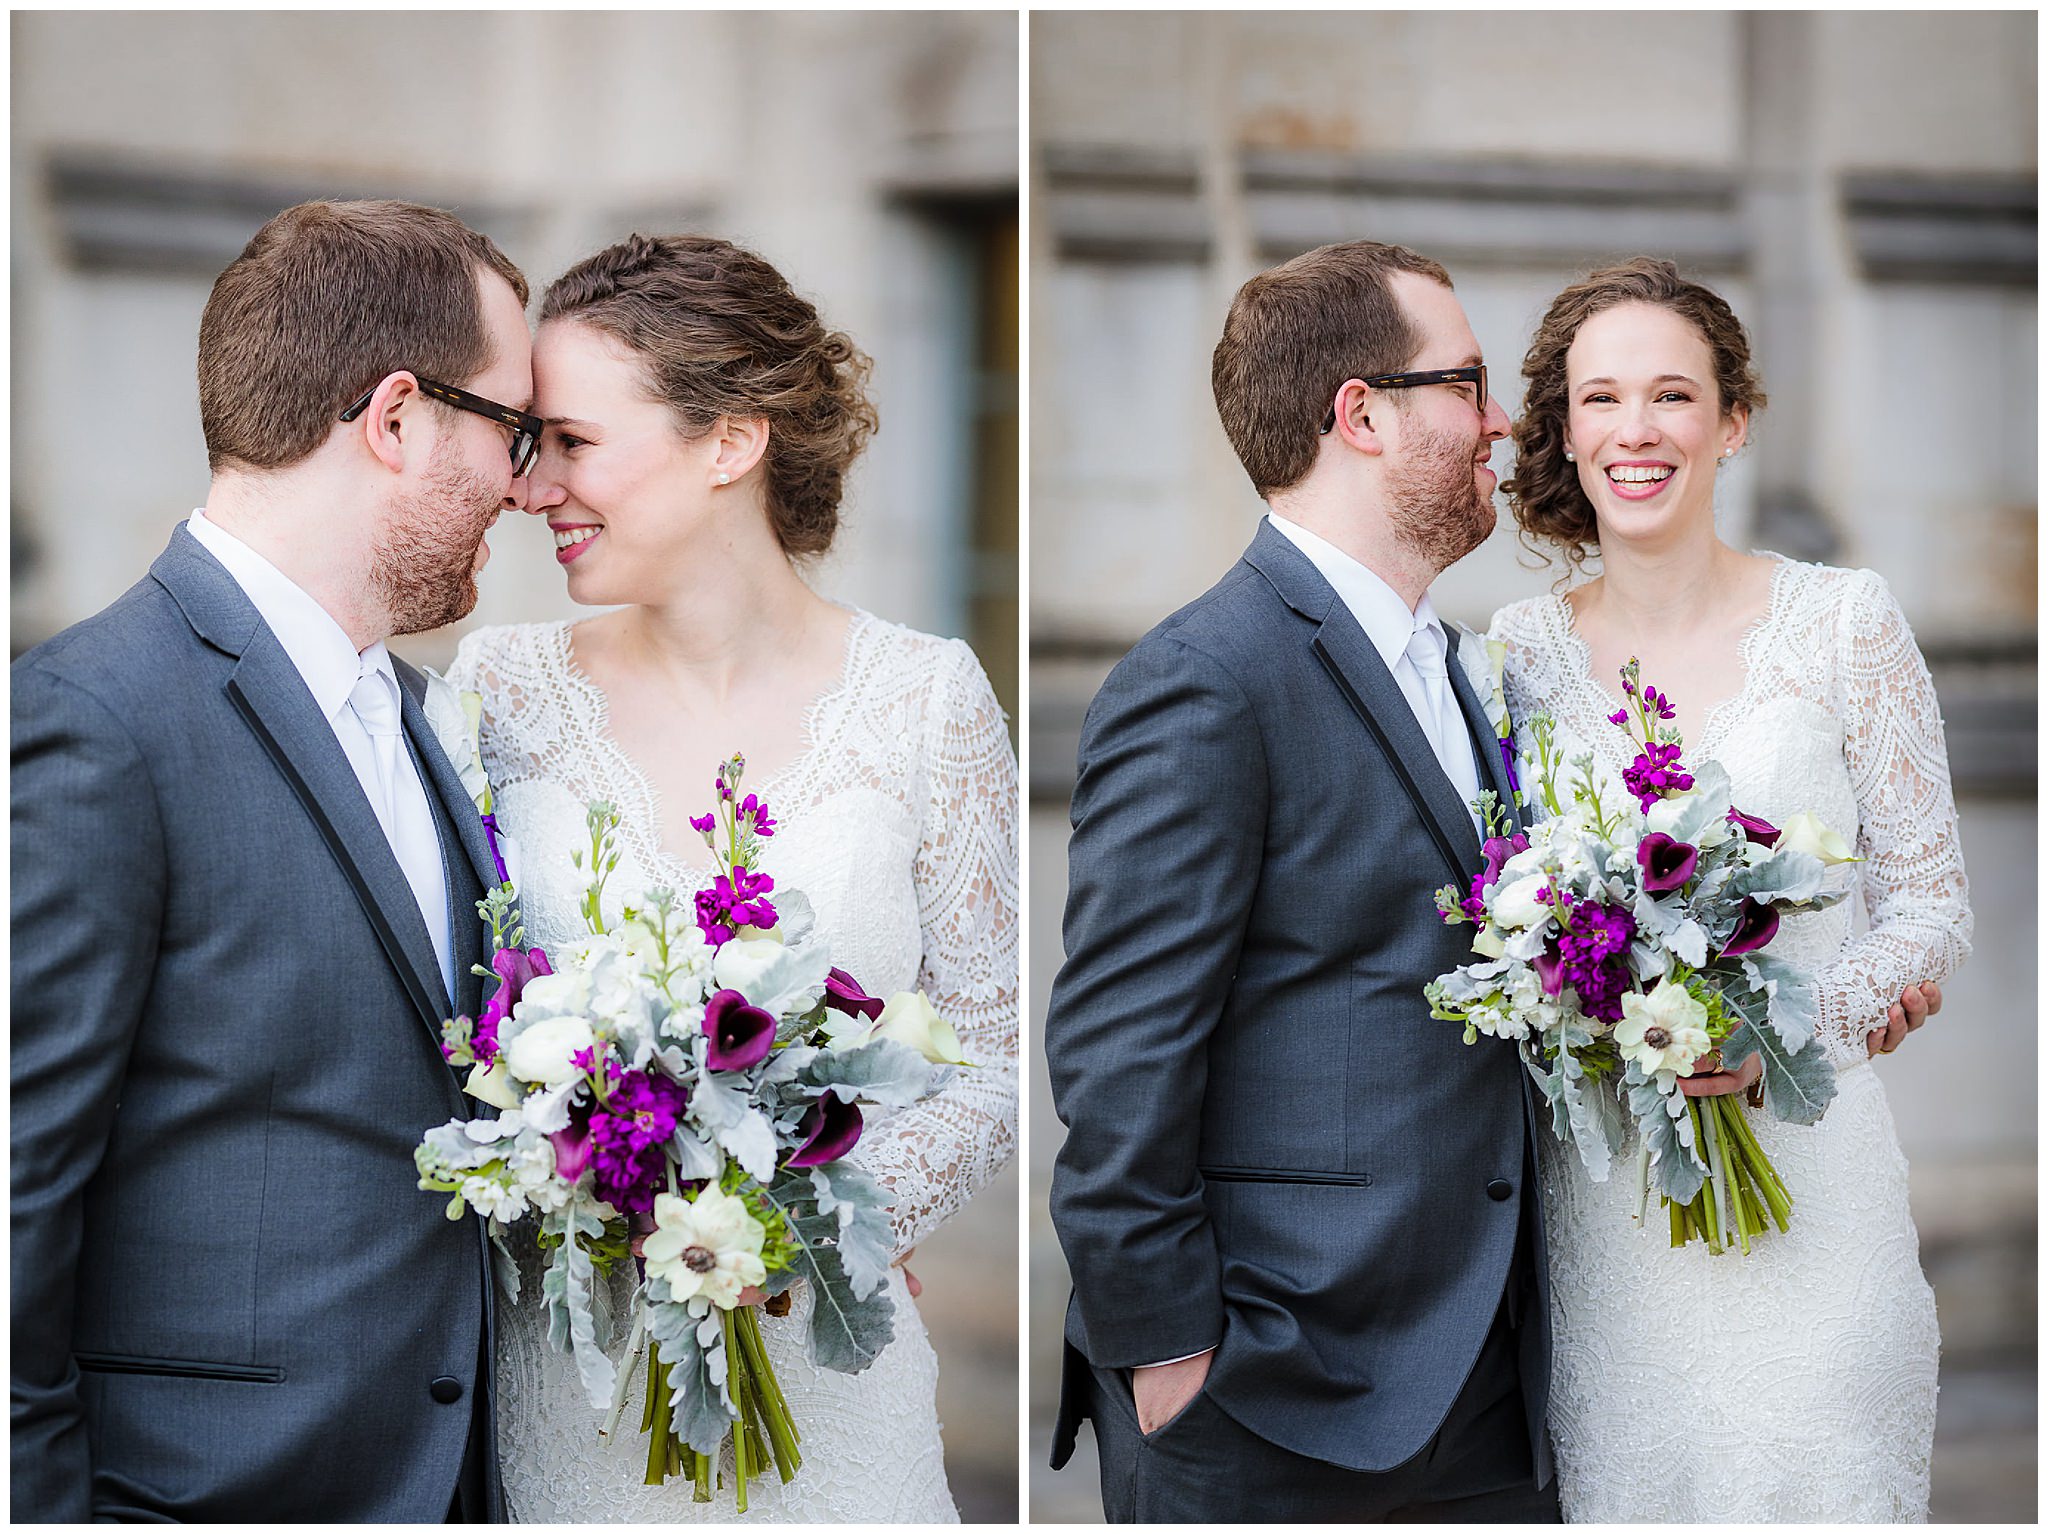 Bride & groom laugh during portraits after their Heinz Chapel wedding; flowers by Holly Hanna Floral